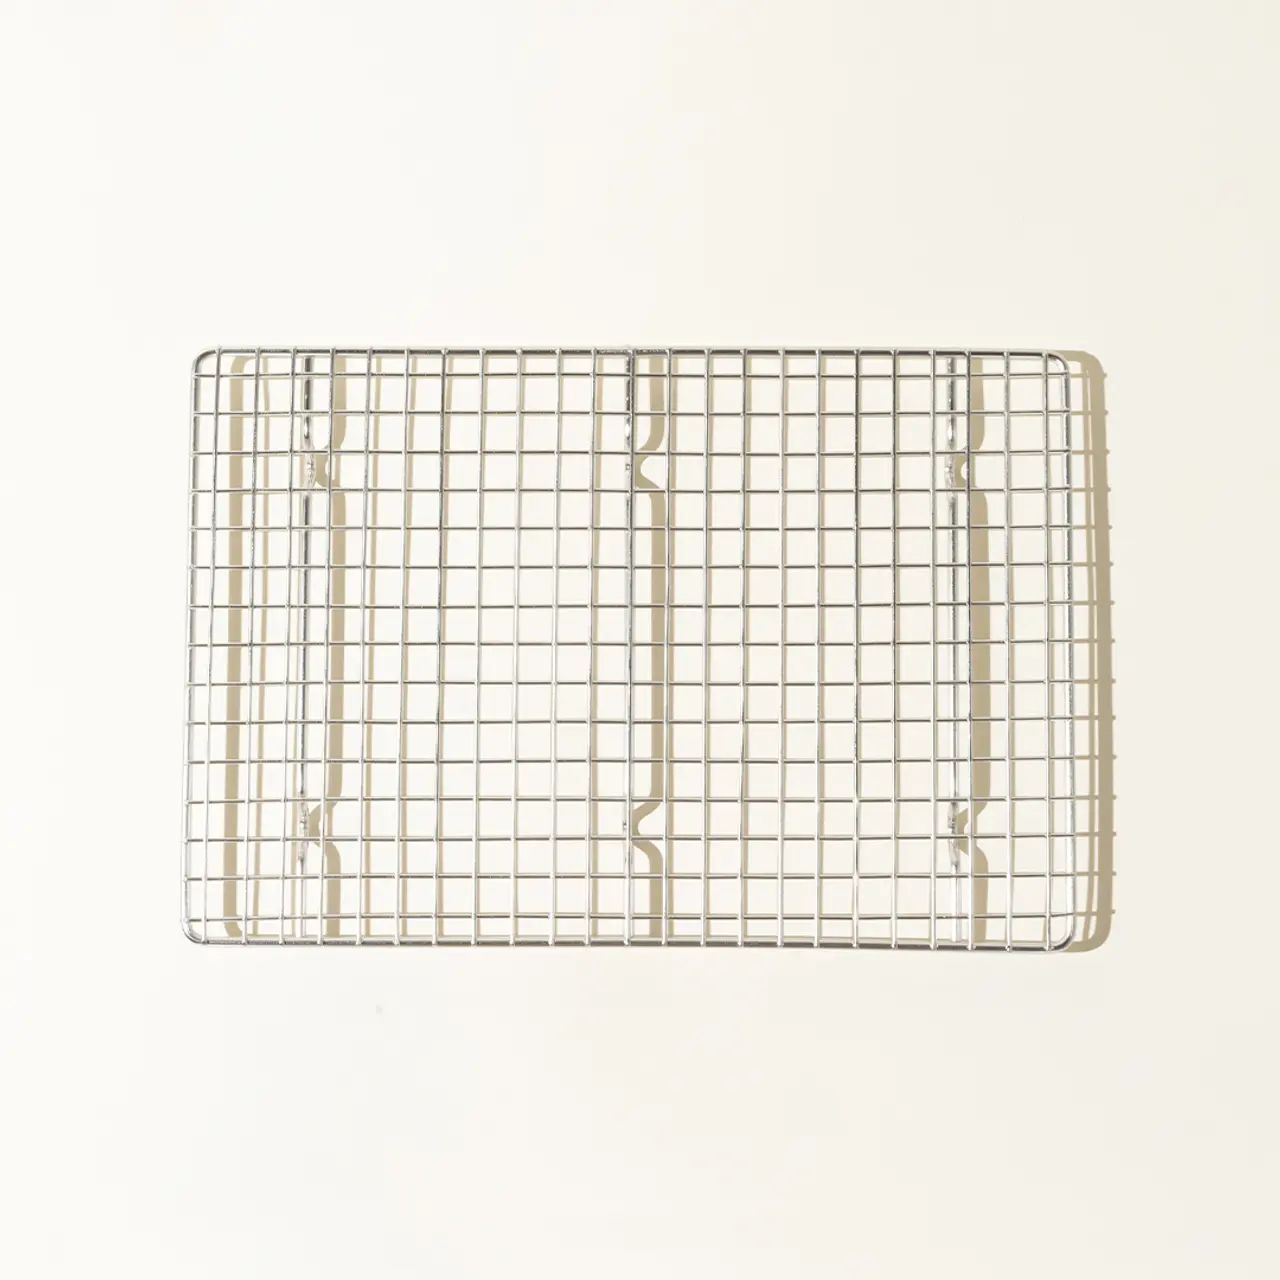 A simple metal cooling rack is centered on a plain, light background.